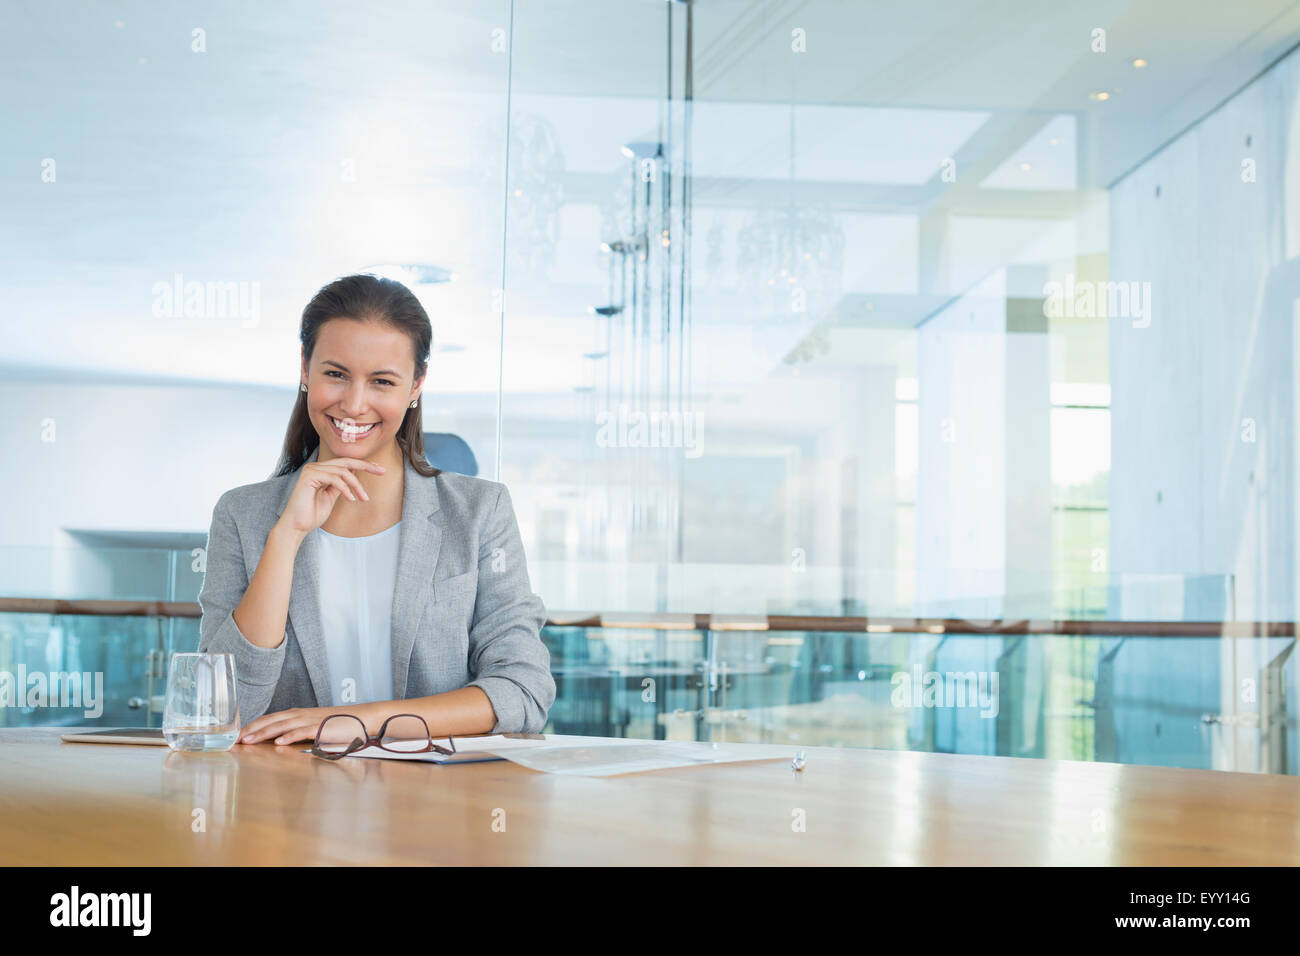 Portrait confident businesswoman at conference room table Stock Photo